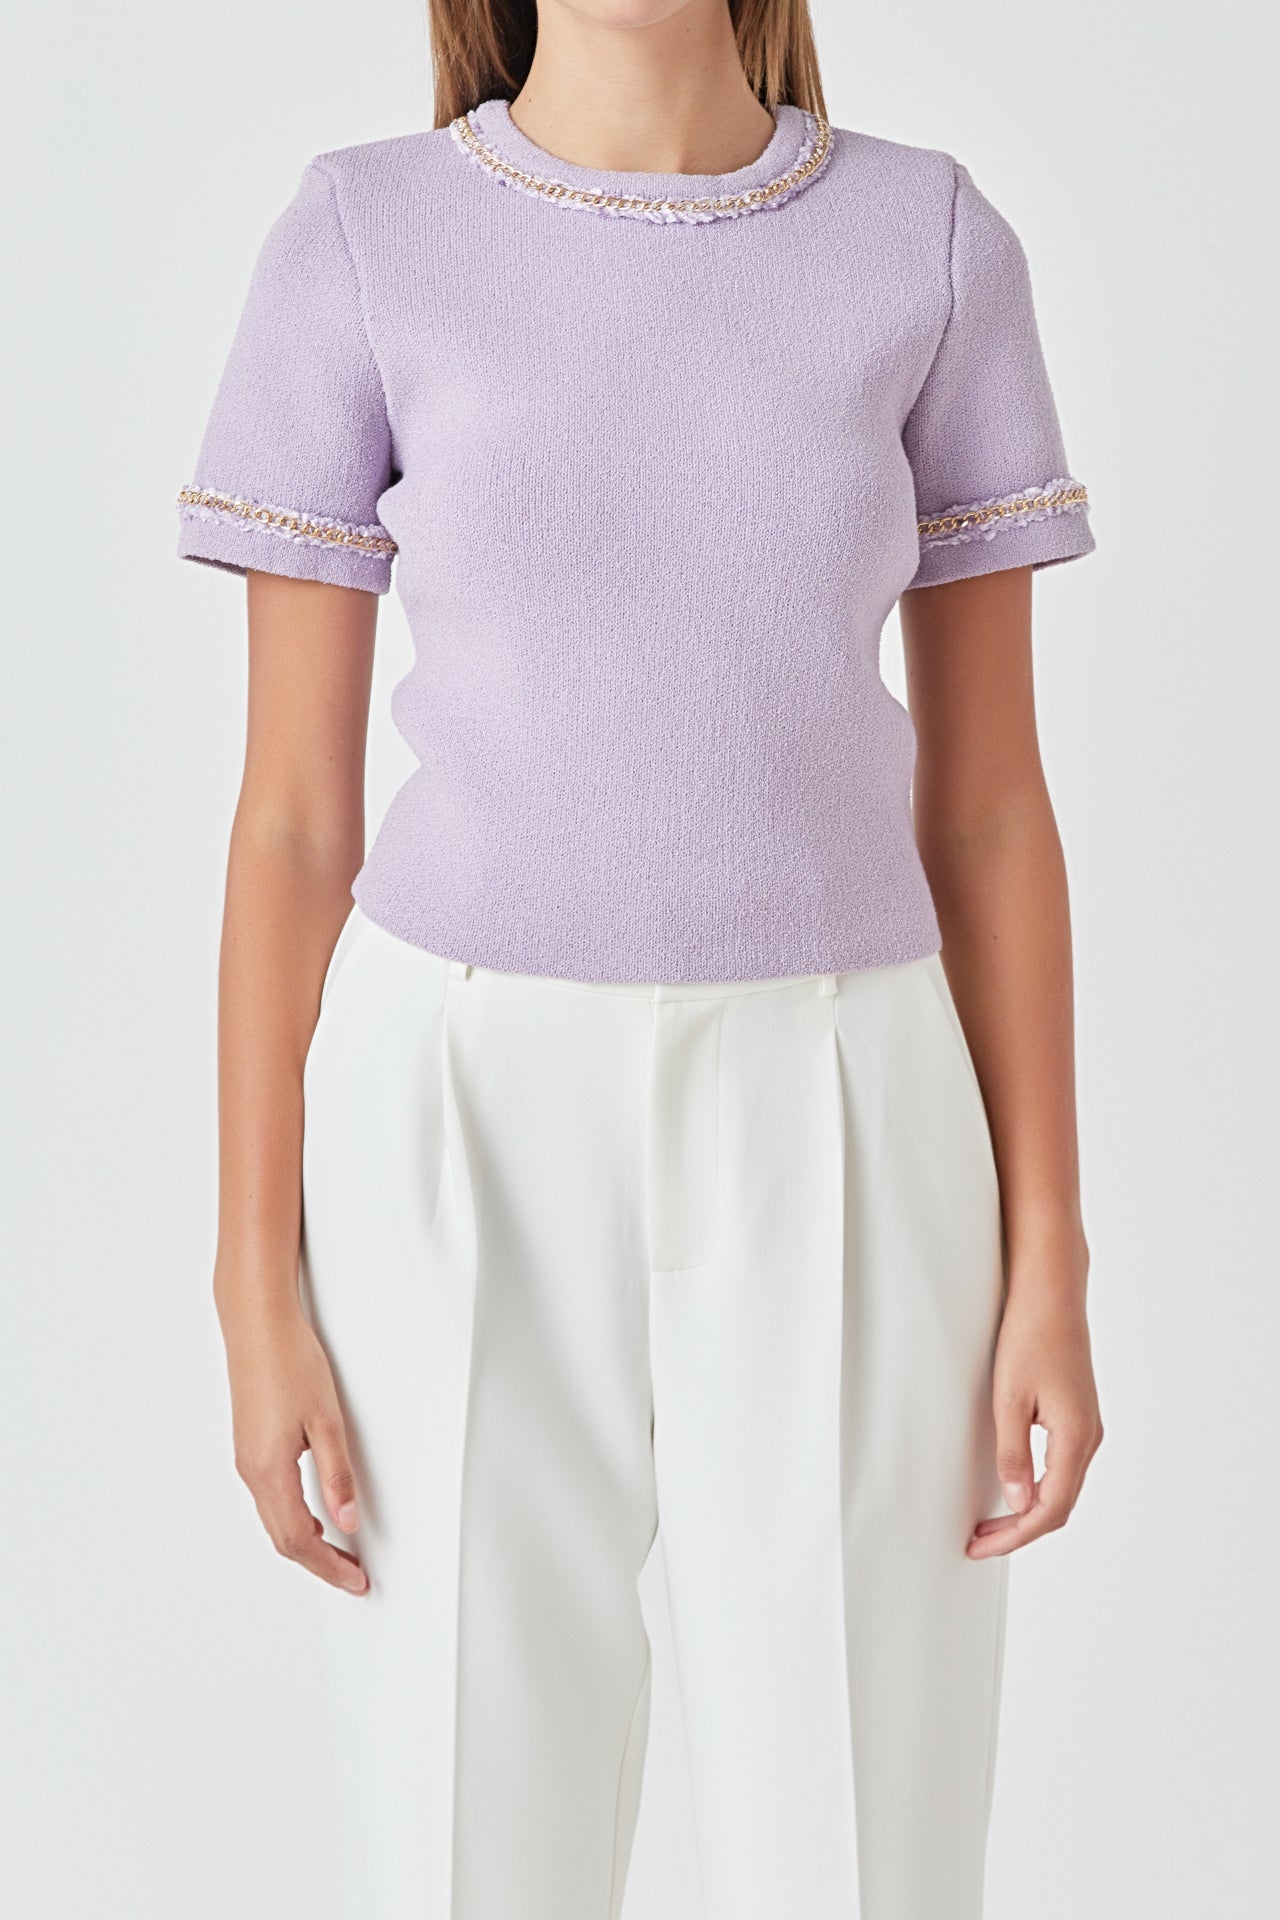 ENDLESS ROSE - Chain Trim Knit Short Sleeve Top - TOPS available at Objectrare